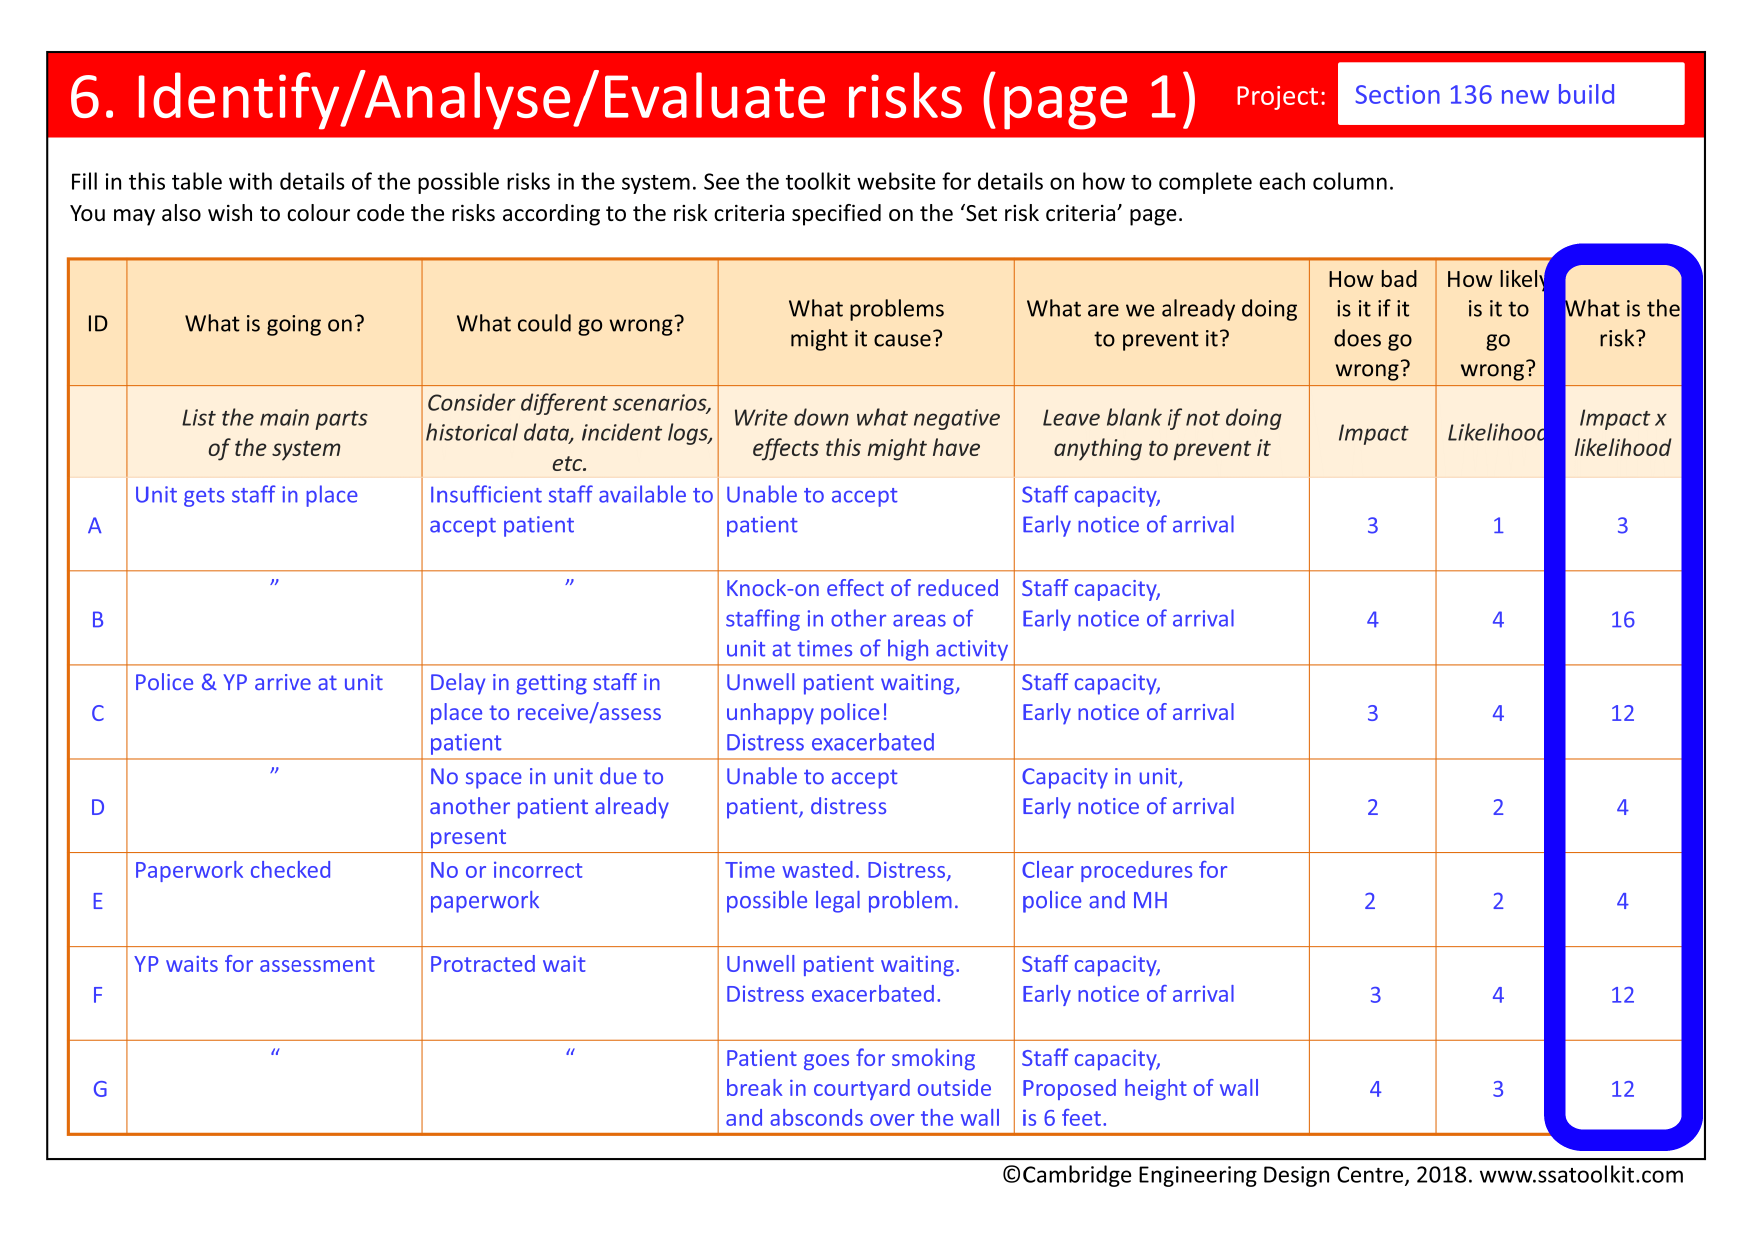 Screenshot of part of the risk table from the Section 136 case study. The column for the risk scores is circled. These scores are obtained by multiplying the likelihood and impact scores together. For example, the problem of being unable to accept a patient due to insufficient staff being available has an impact of 3 and a likelihood of 1, and thus a risk score of 3. The problem of reduced staffing in other areas of the unit as staff are reallocated to accept a new patient has an impact of 4 and a likelihood of 4, and thus a risk score of 16. The full form in pdf is available from the Resources page.